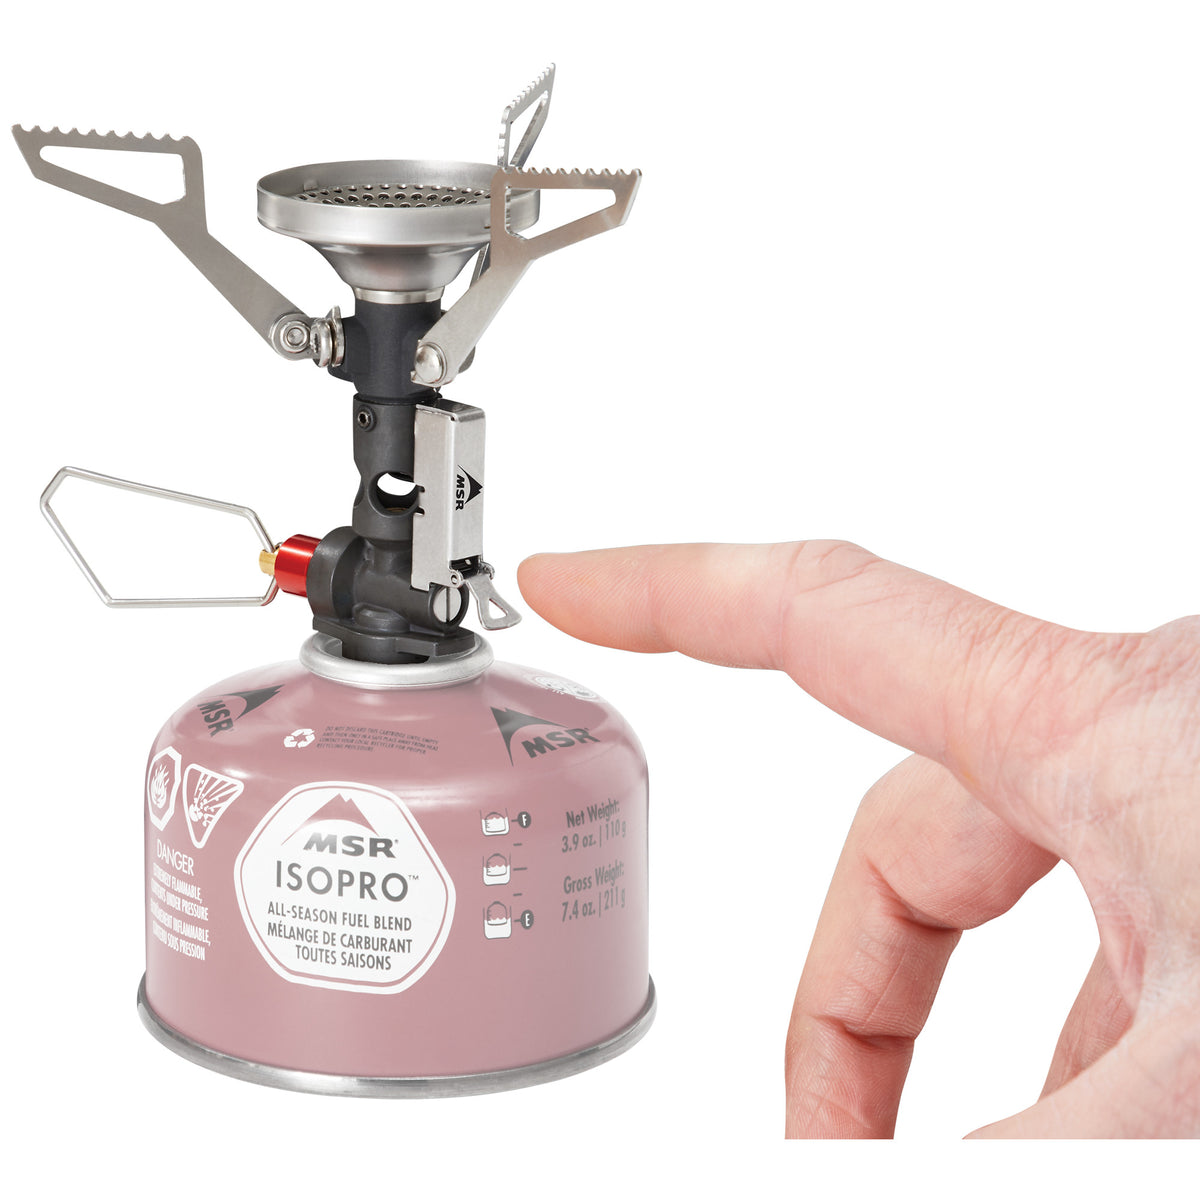 MSR Pocket Rocket Deluxe camping stove, shown next to hand for size comparisson